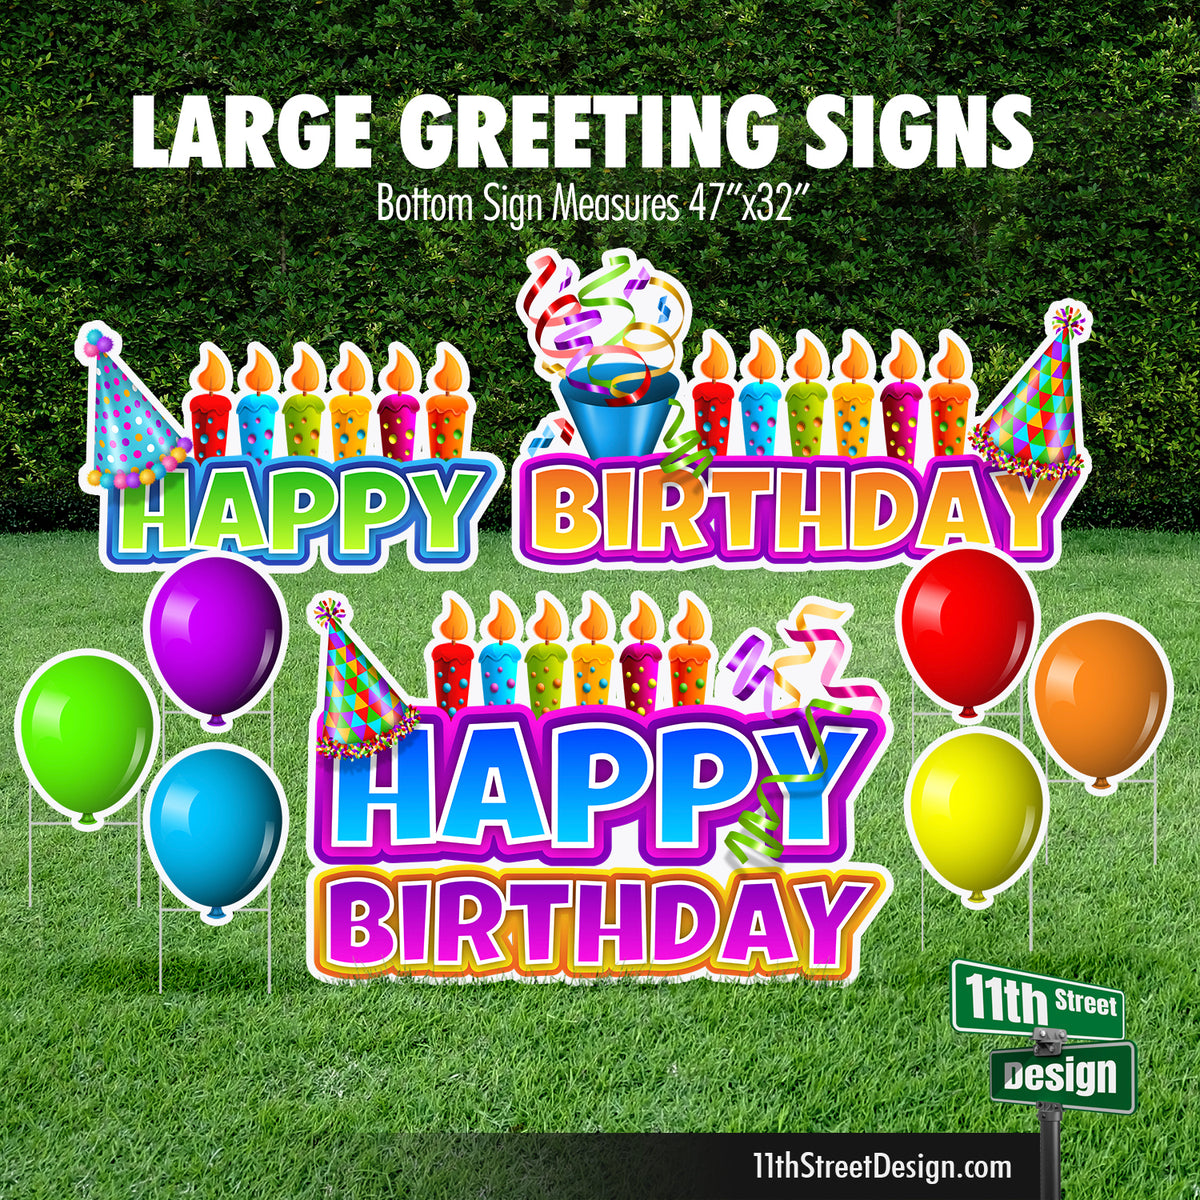 Happy Birthday Large Greeting Signs - Candle Tops